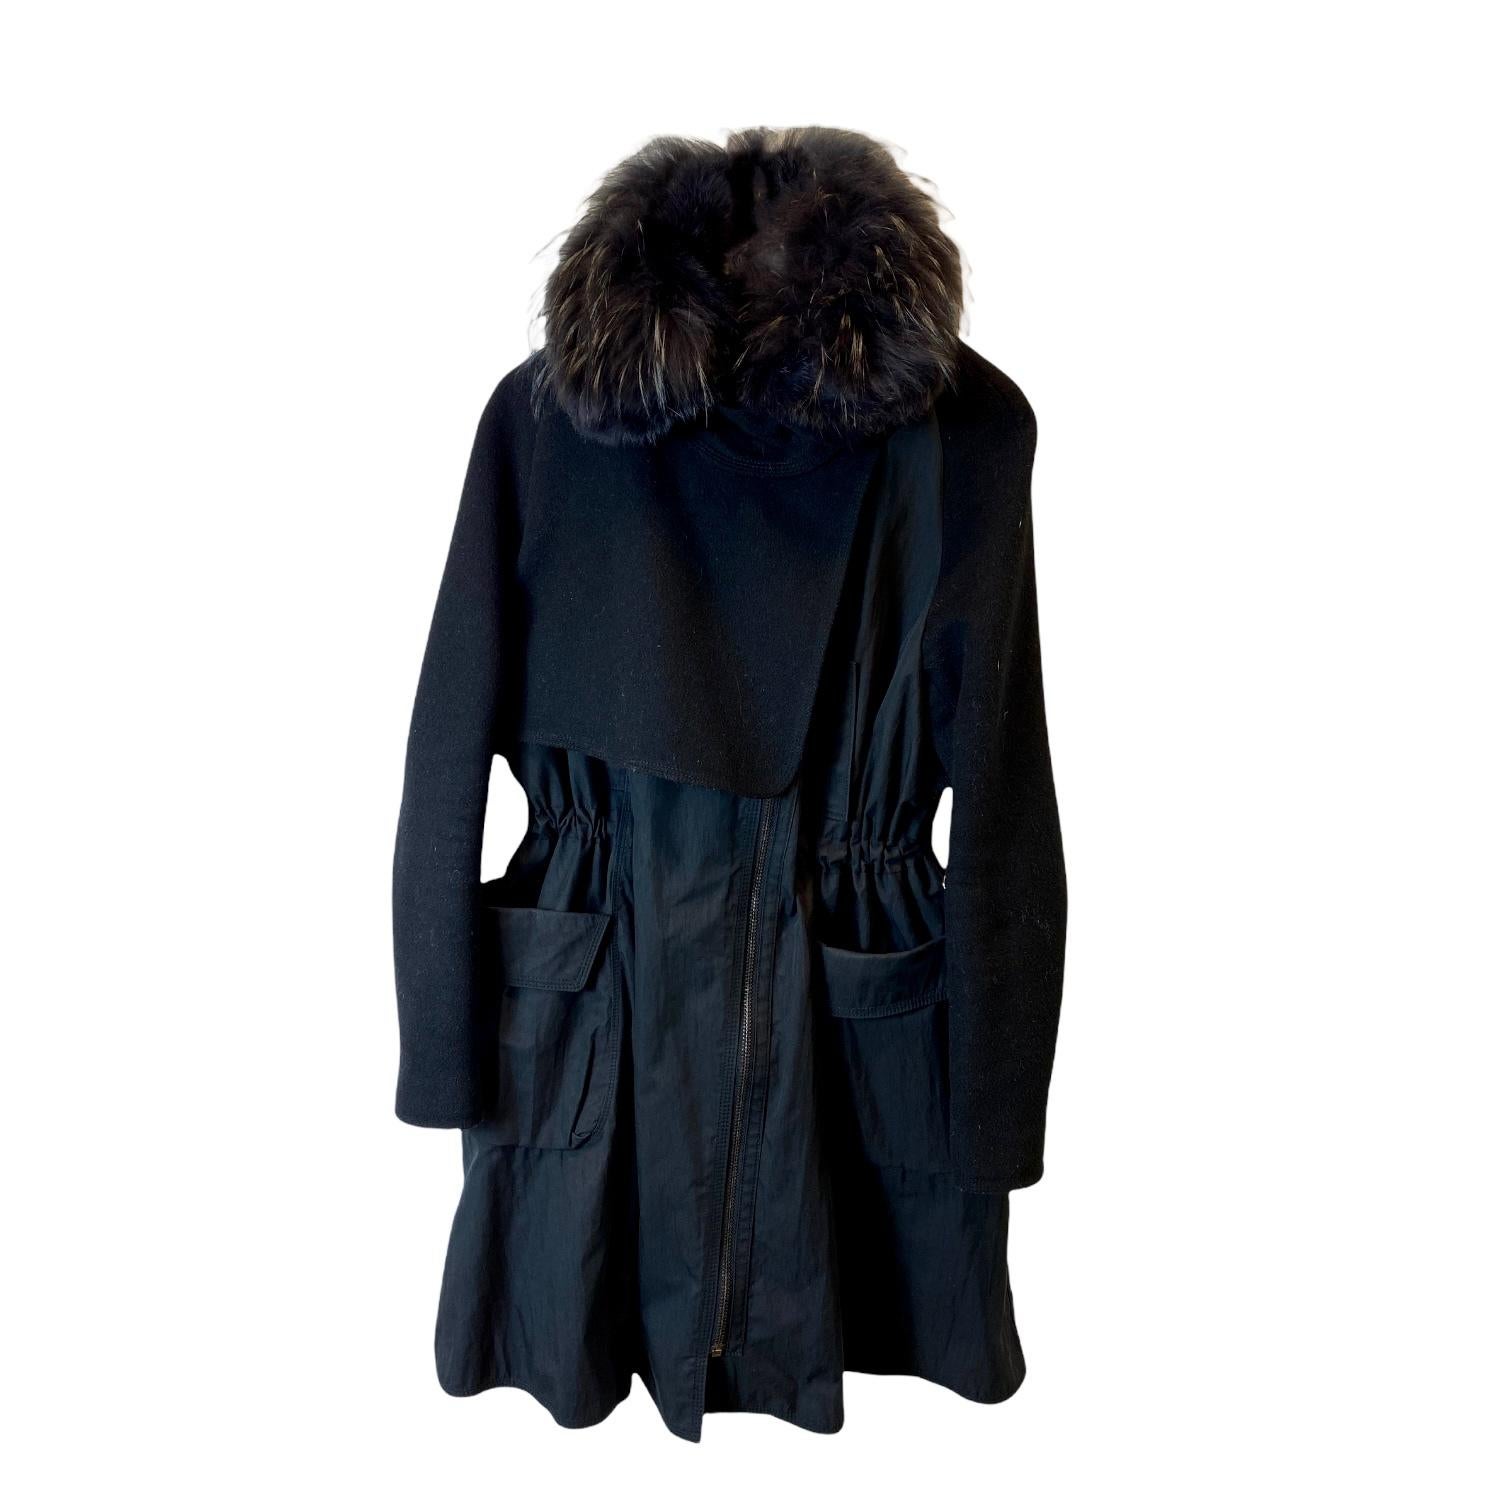 Black 0'2nd for Barney's Long Coat with Rabbit Fur Hood